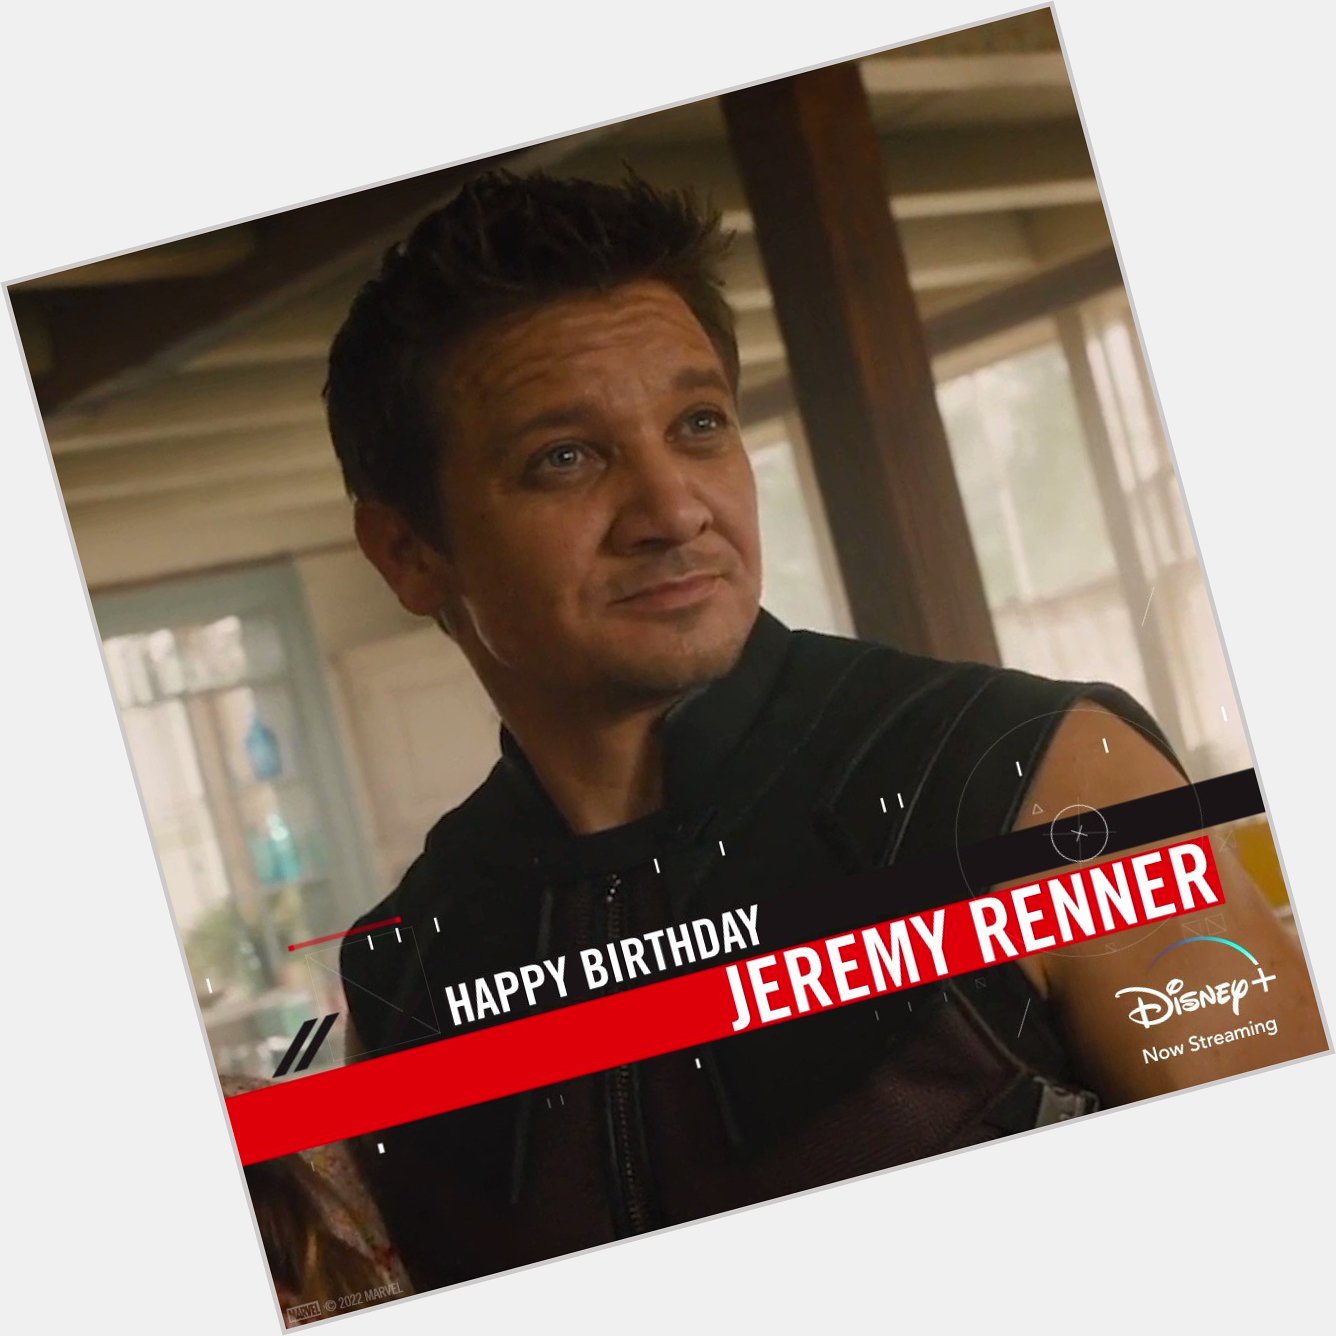   Will he be home for his birthday? We sure hope so. Happy birthday Jeremy Renner! 